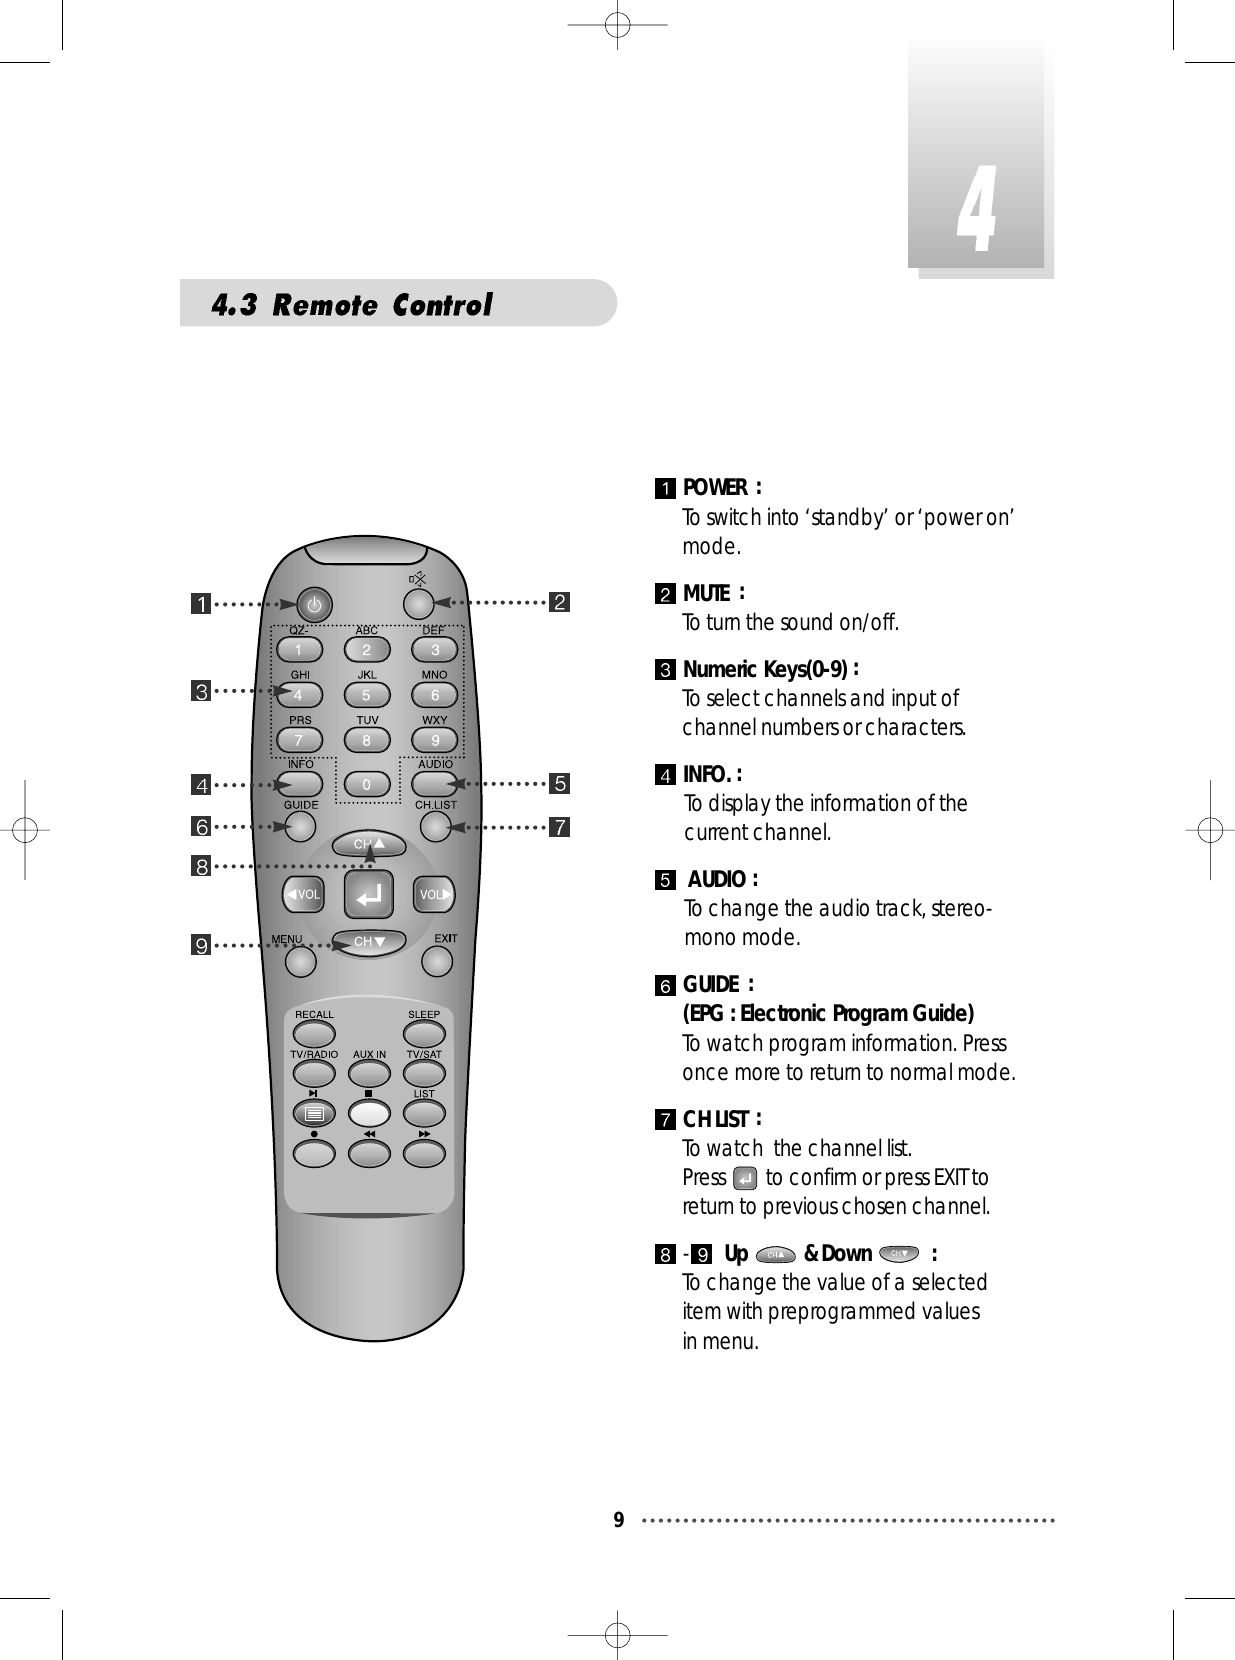 9POWER  :To switch into ‘standby’ or ‘power on’mode.MUTE  : To turn the sound on/off.Numeric Keys(0-9) : To select channels and input ofchannel numbers or characters.INFO. :To display the information of thecurrent channel.AUDIO :To change the audio track, stereo-mono mode.GUIDE  :(EPG : Electronic Program Guide)To watch program information. Pressonce more to return to normal mode.CH LIST  :To watch  the channel list. Press  to confirm or press EXIT toreturn to previous chosen channel.-Up &amp; Down  :To change the value of a selecteditem with preprogrammed values in menu. 